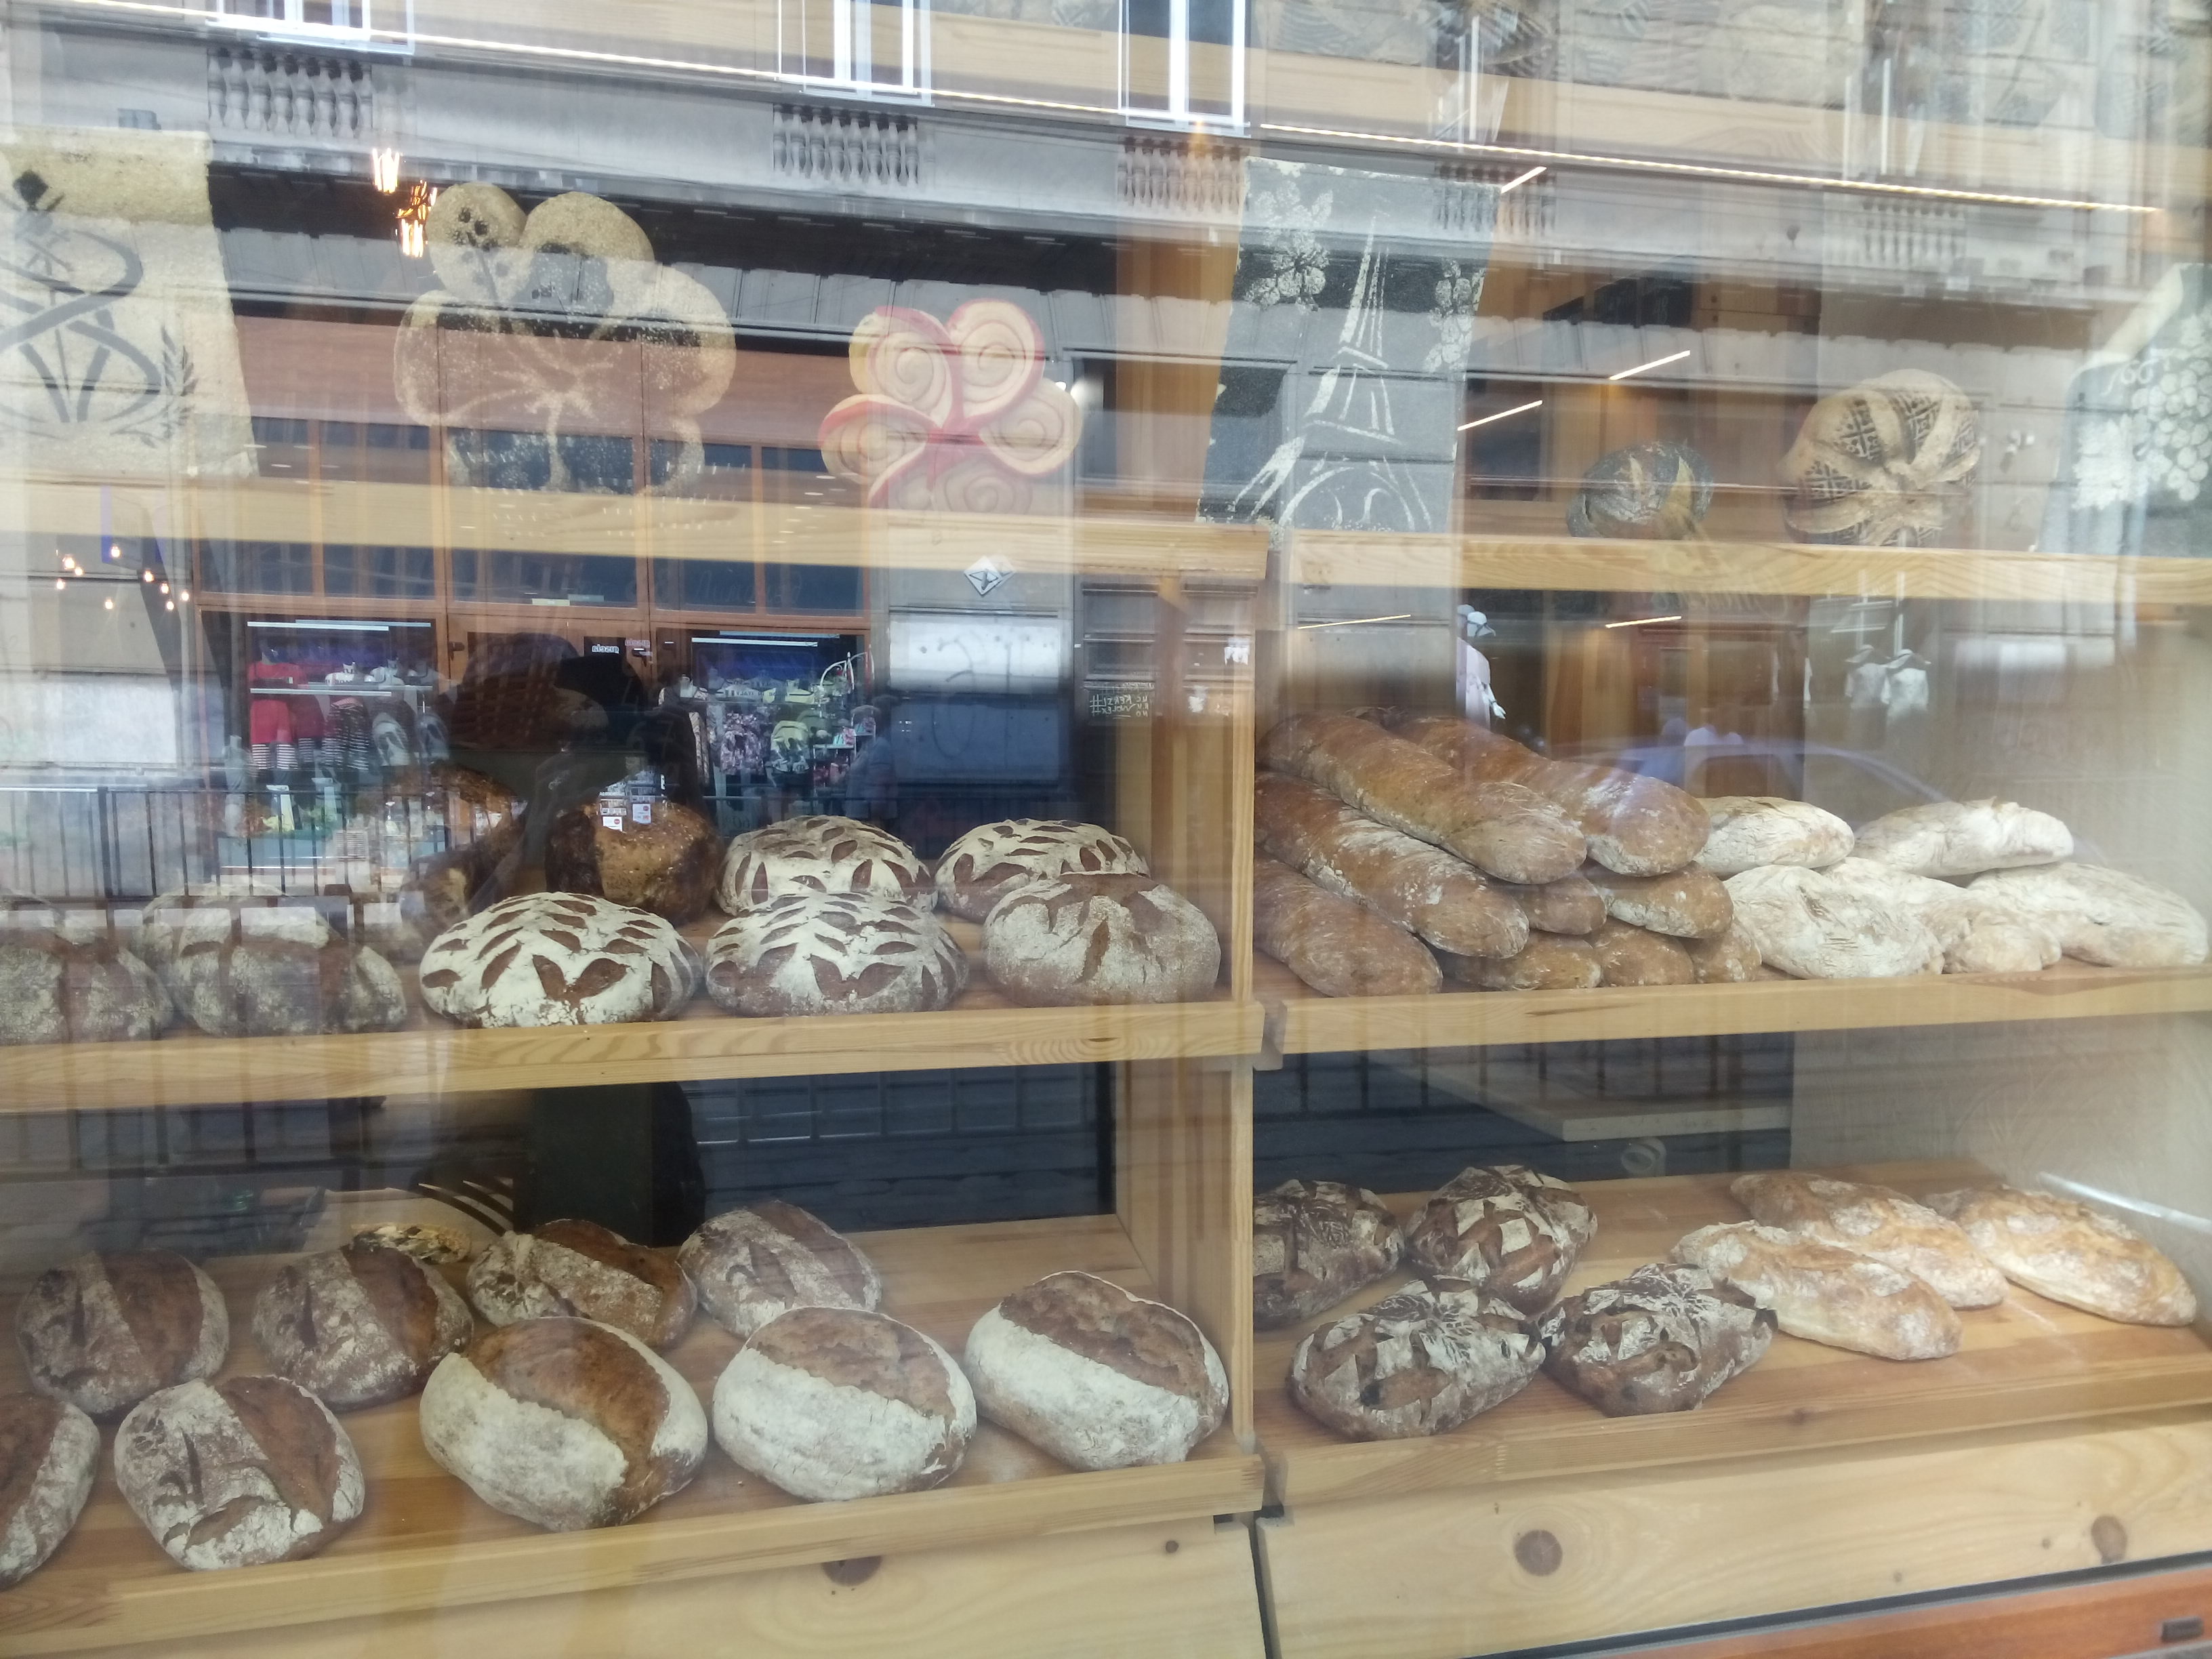 A reflecty glass window with wooden shelves of fresh bread